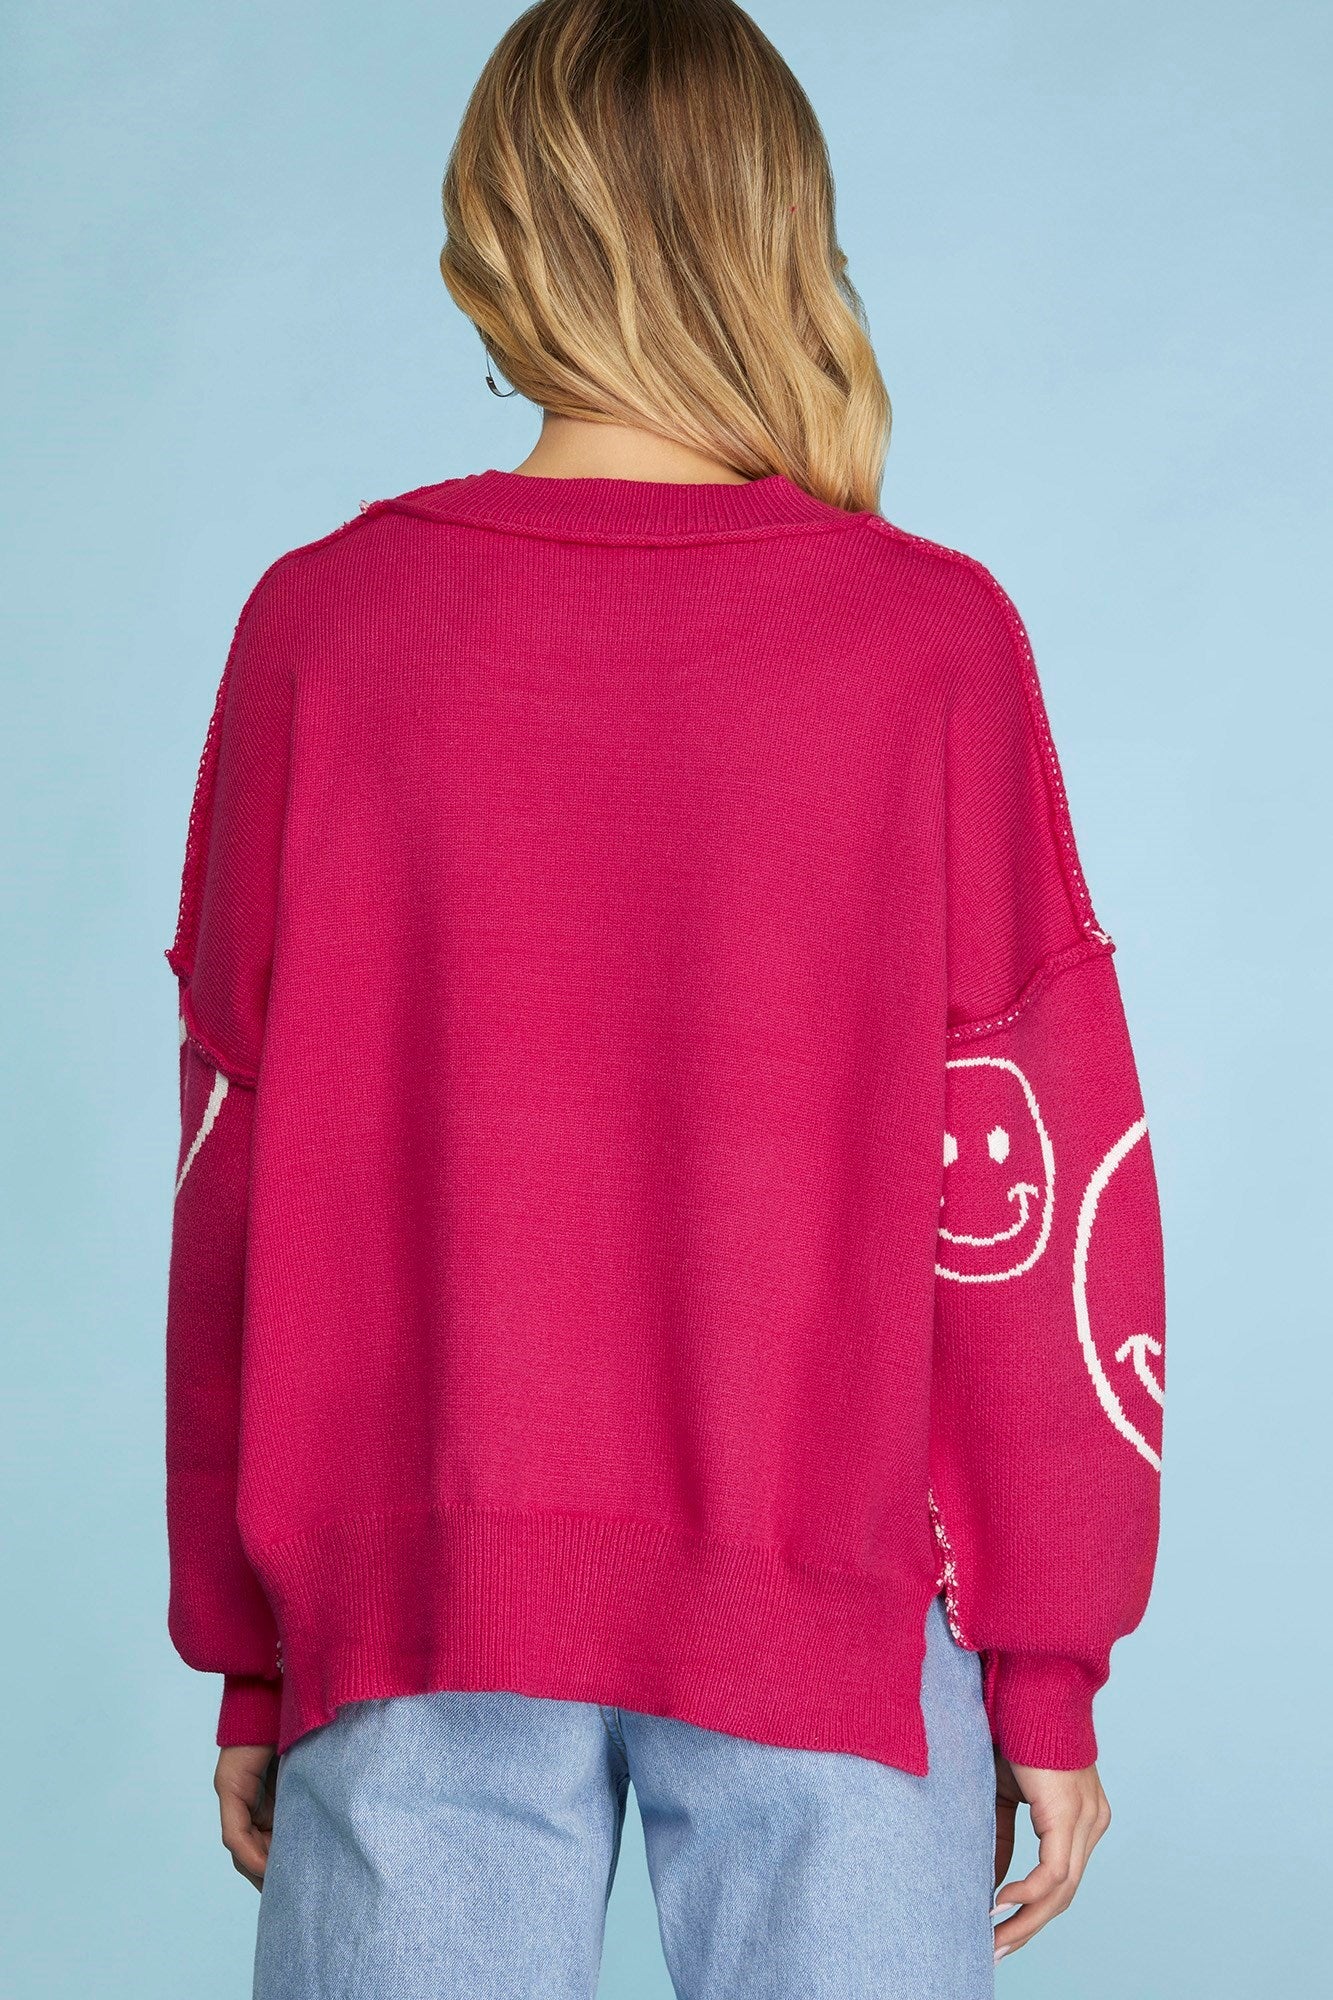 Choose Happiness Smiley Sweater